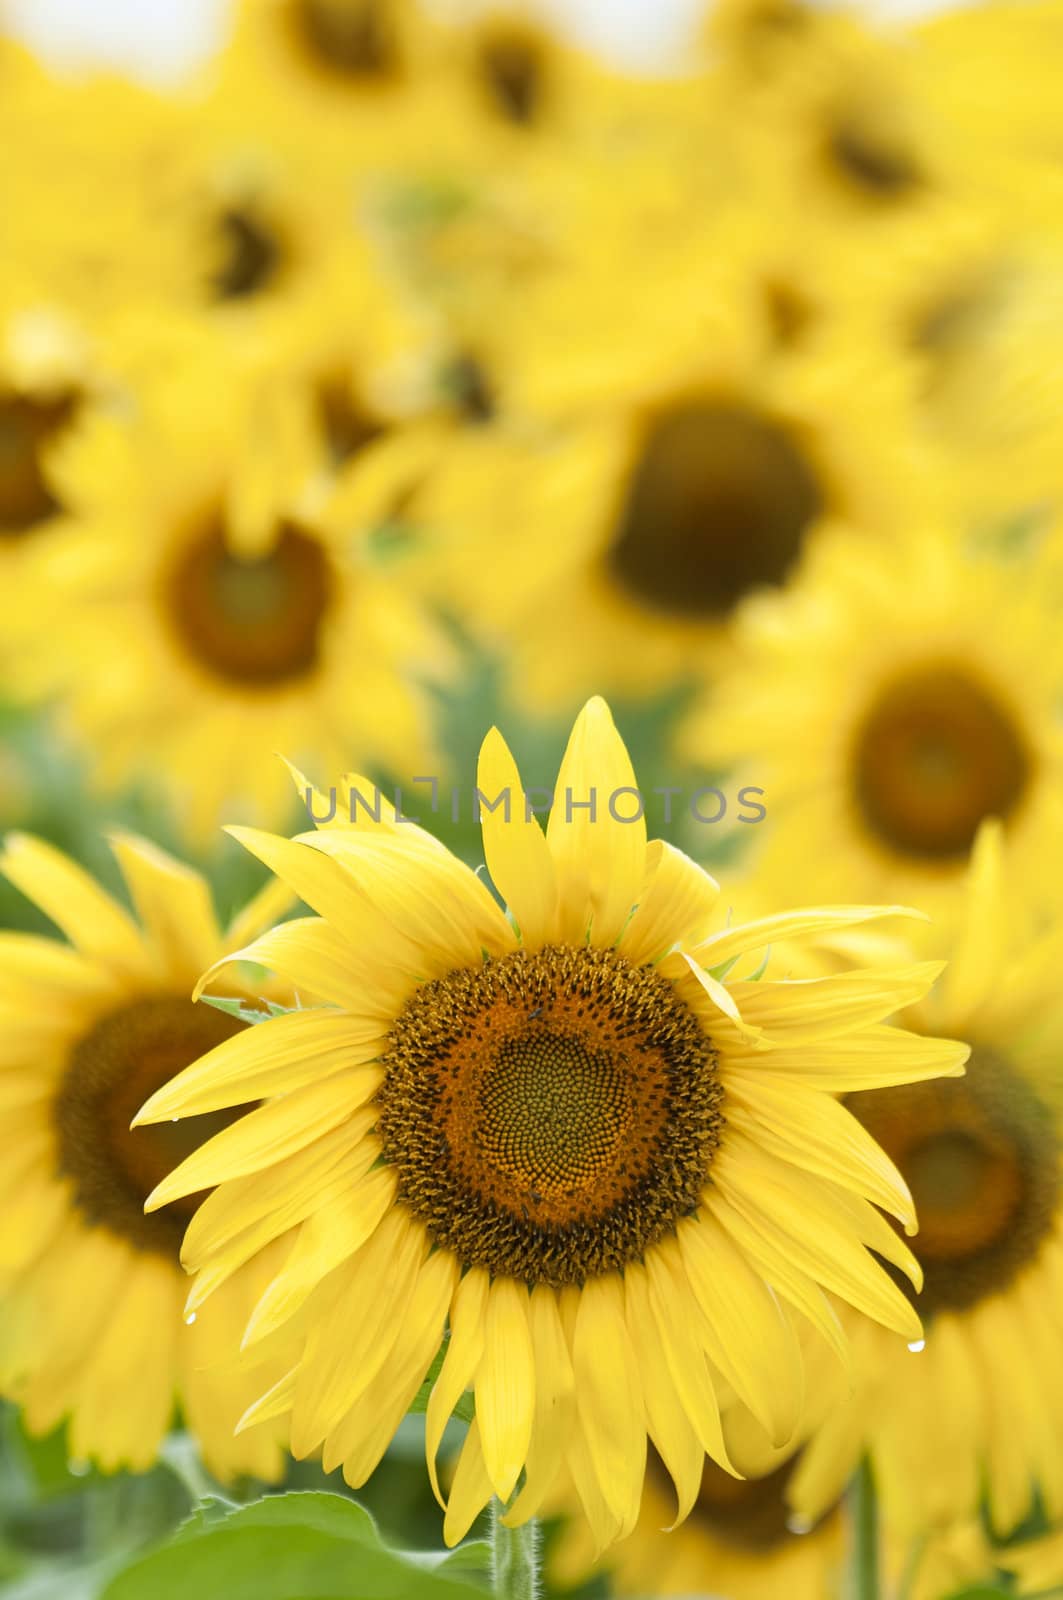 Sunflowers in full bloom in summer by AlessandroZocc